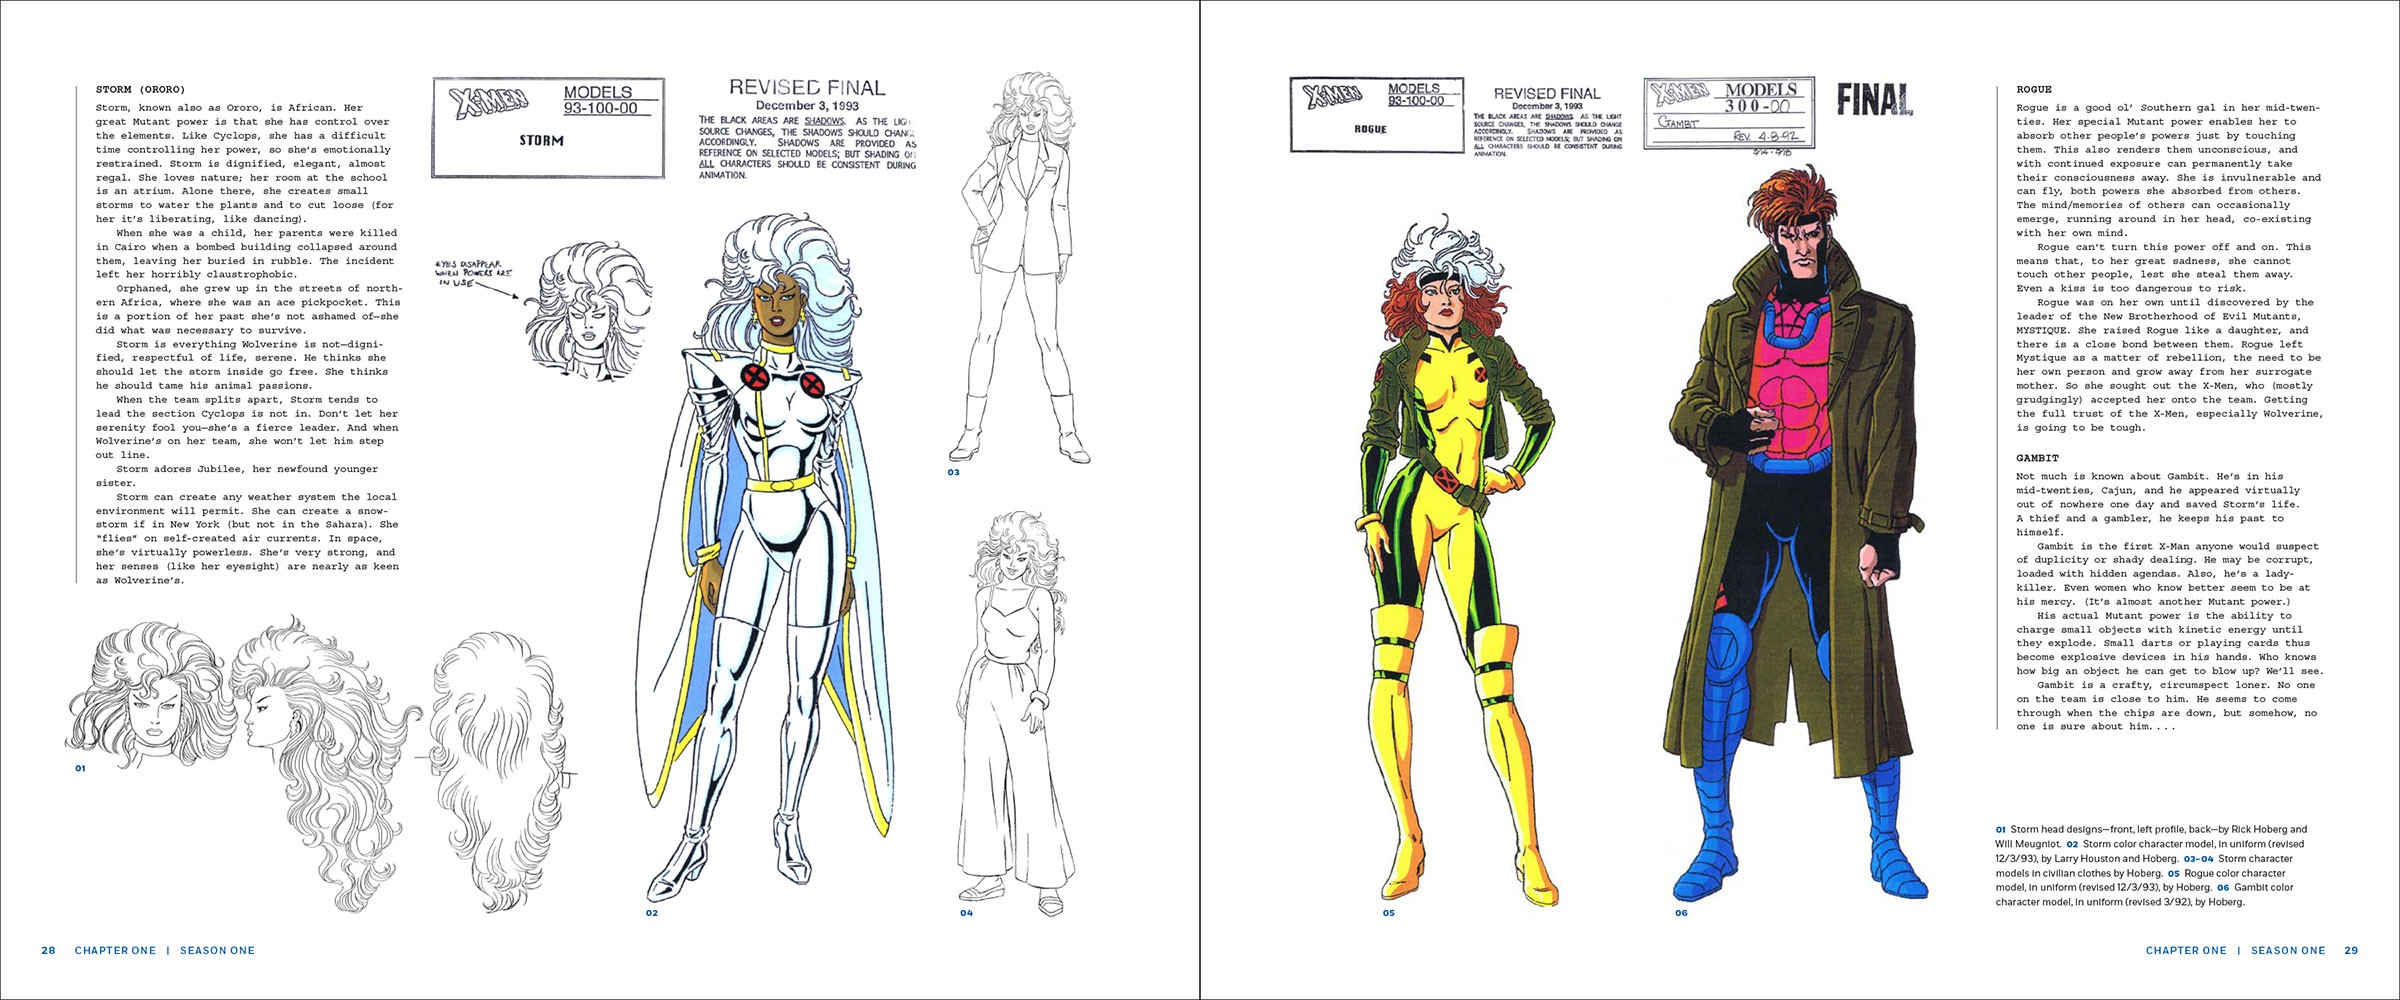 X-Men: The Art and Making of The Animated Series View 6